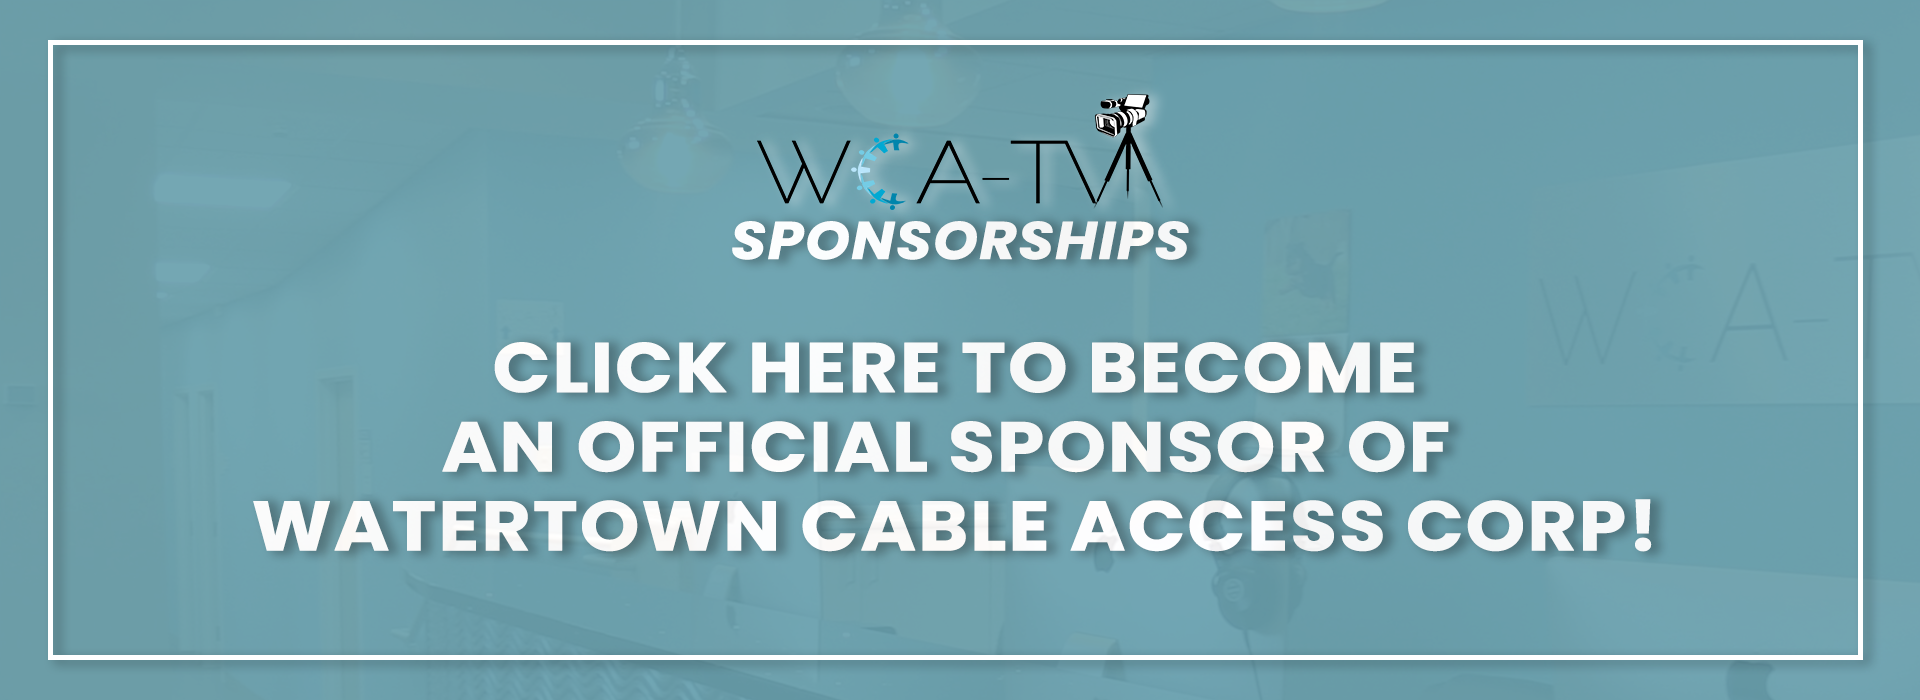 Watertown Cable Access Corp